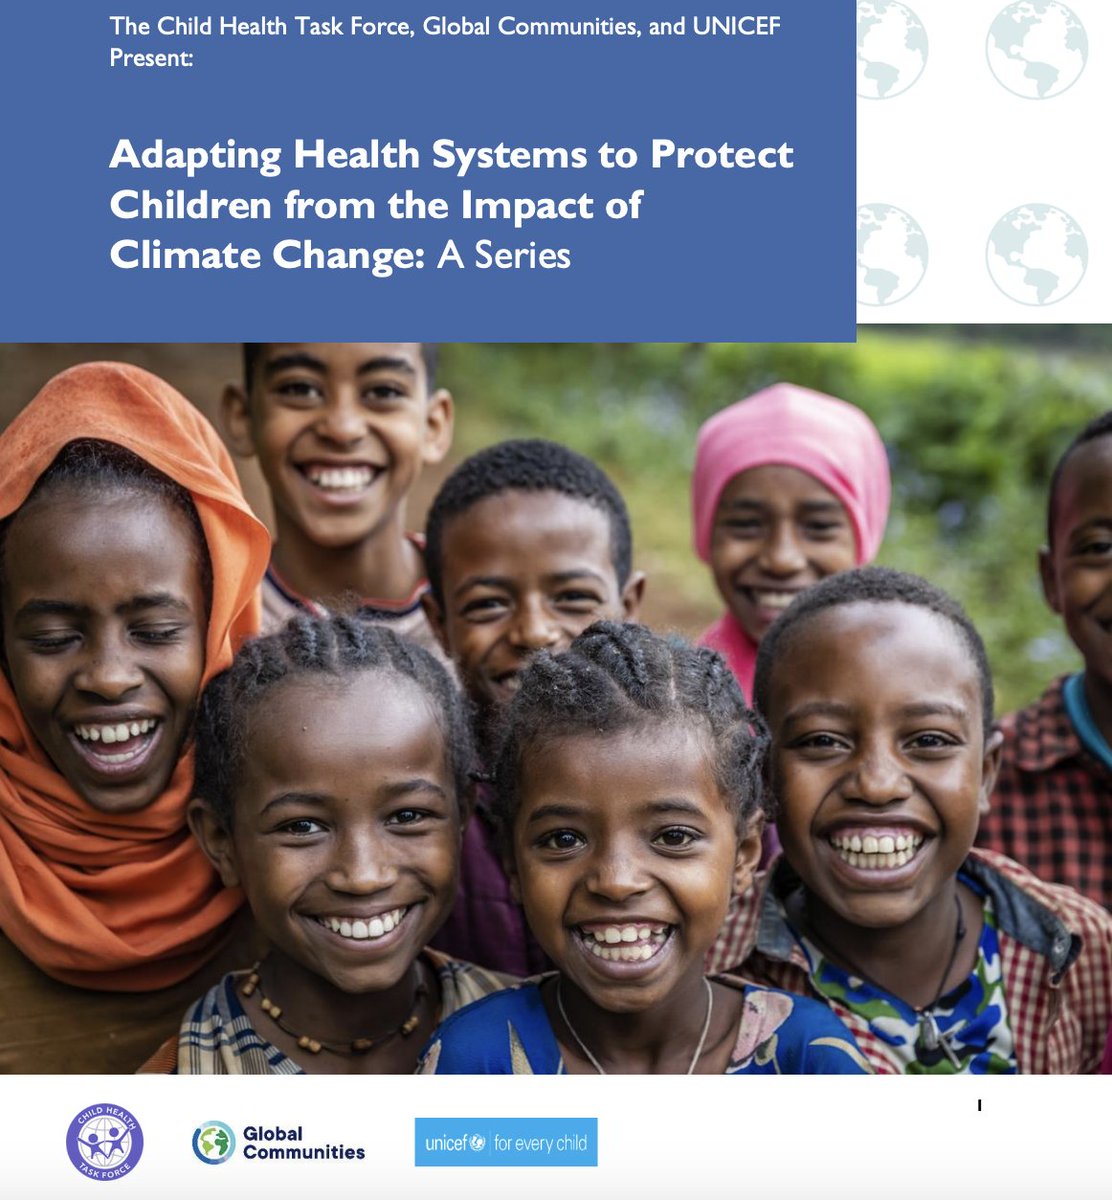 The “Re-imagining the Package of Care for Children” series, co-hosted by the Child Health Task Force, @G_Communities, and @UNICEF, hosted 9 webinars to discuss how to adapt health systems to protect children from climate-related challenges. Final report: bit.ly/3xJPeY8